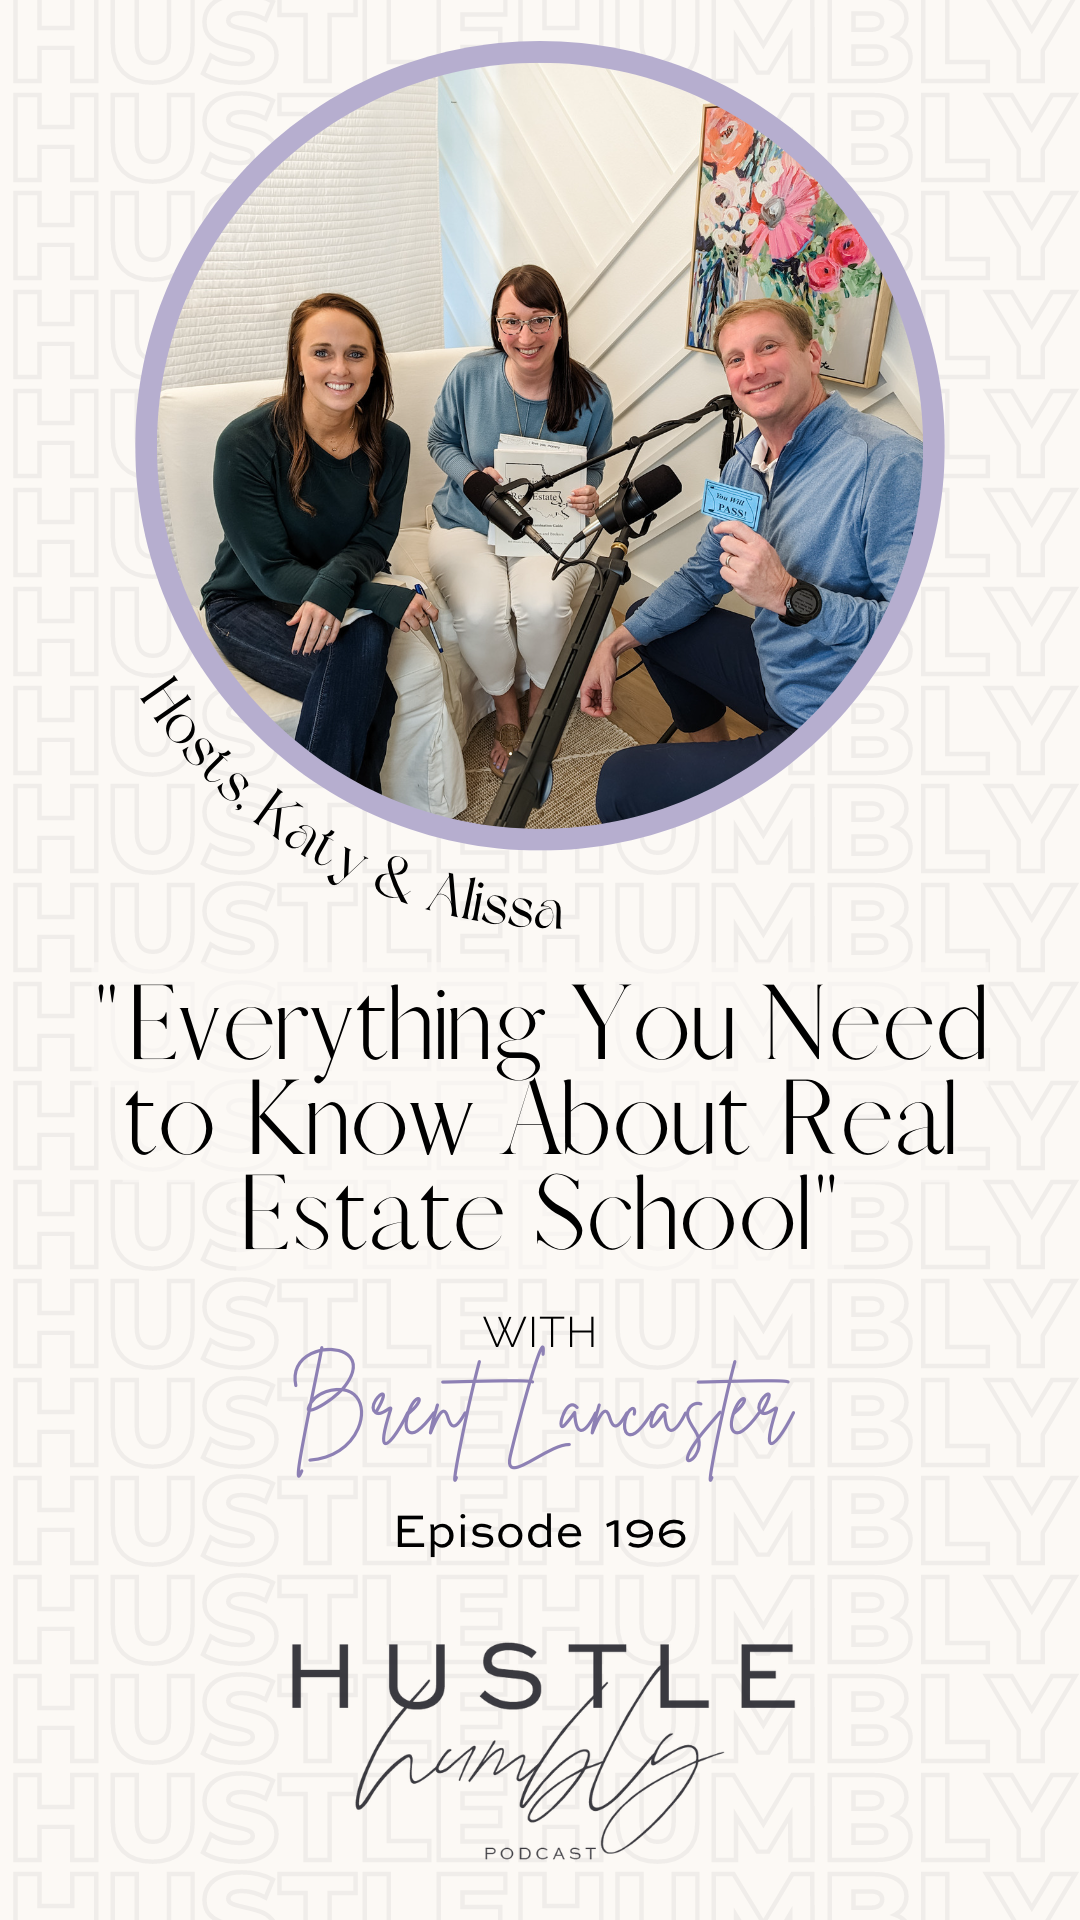 Real estate licensing examination guide from Bob Brooks School of Real Estate.